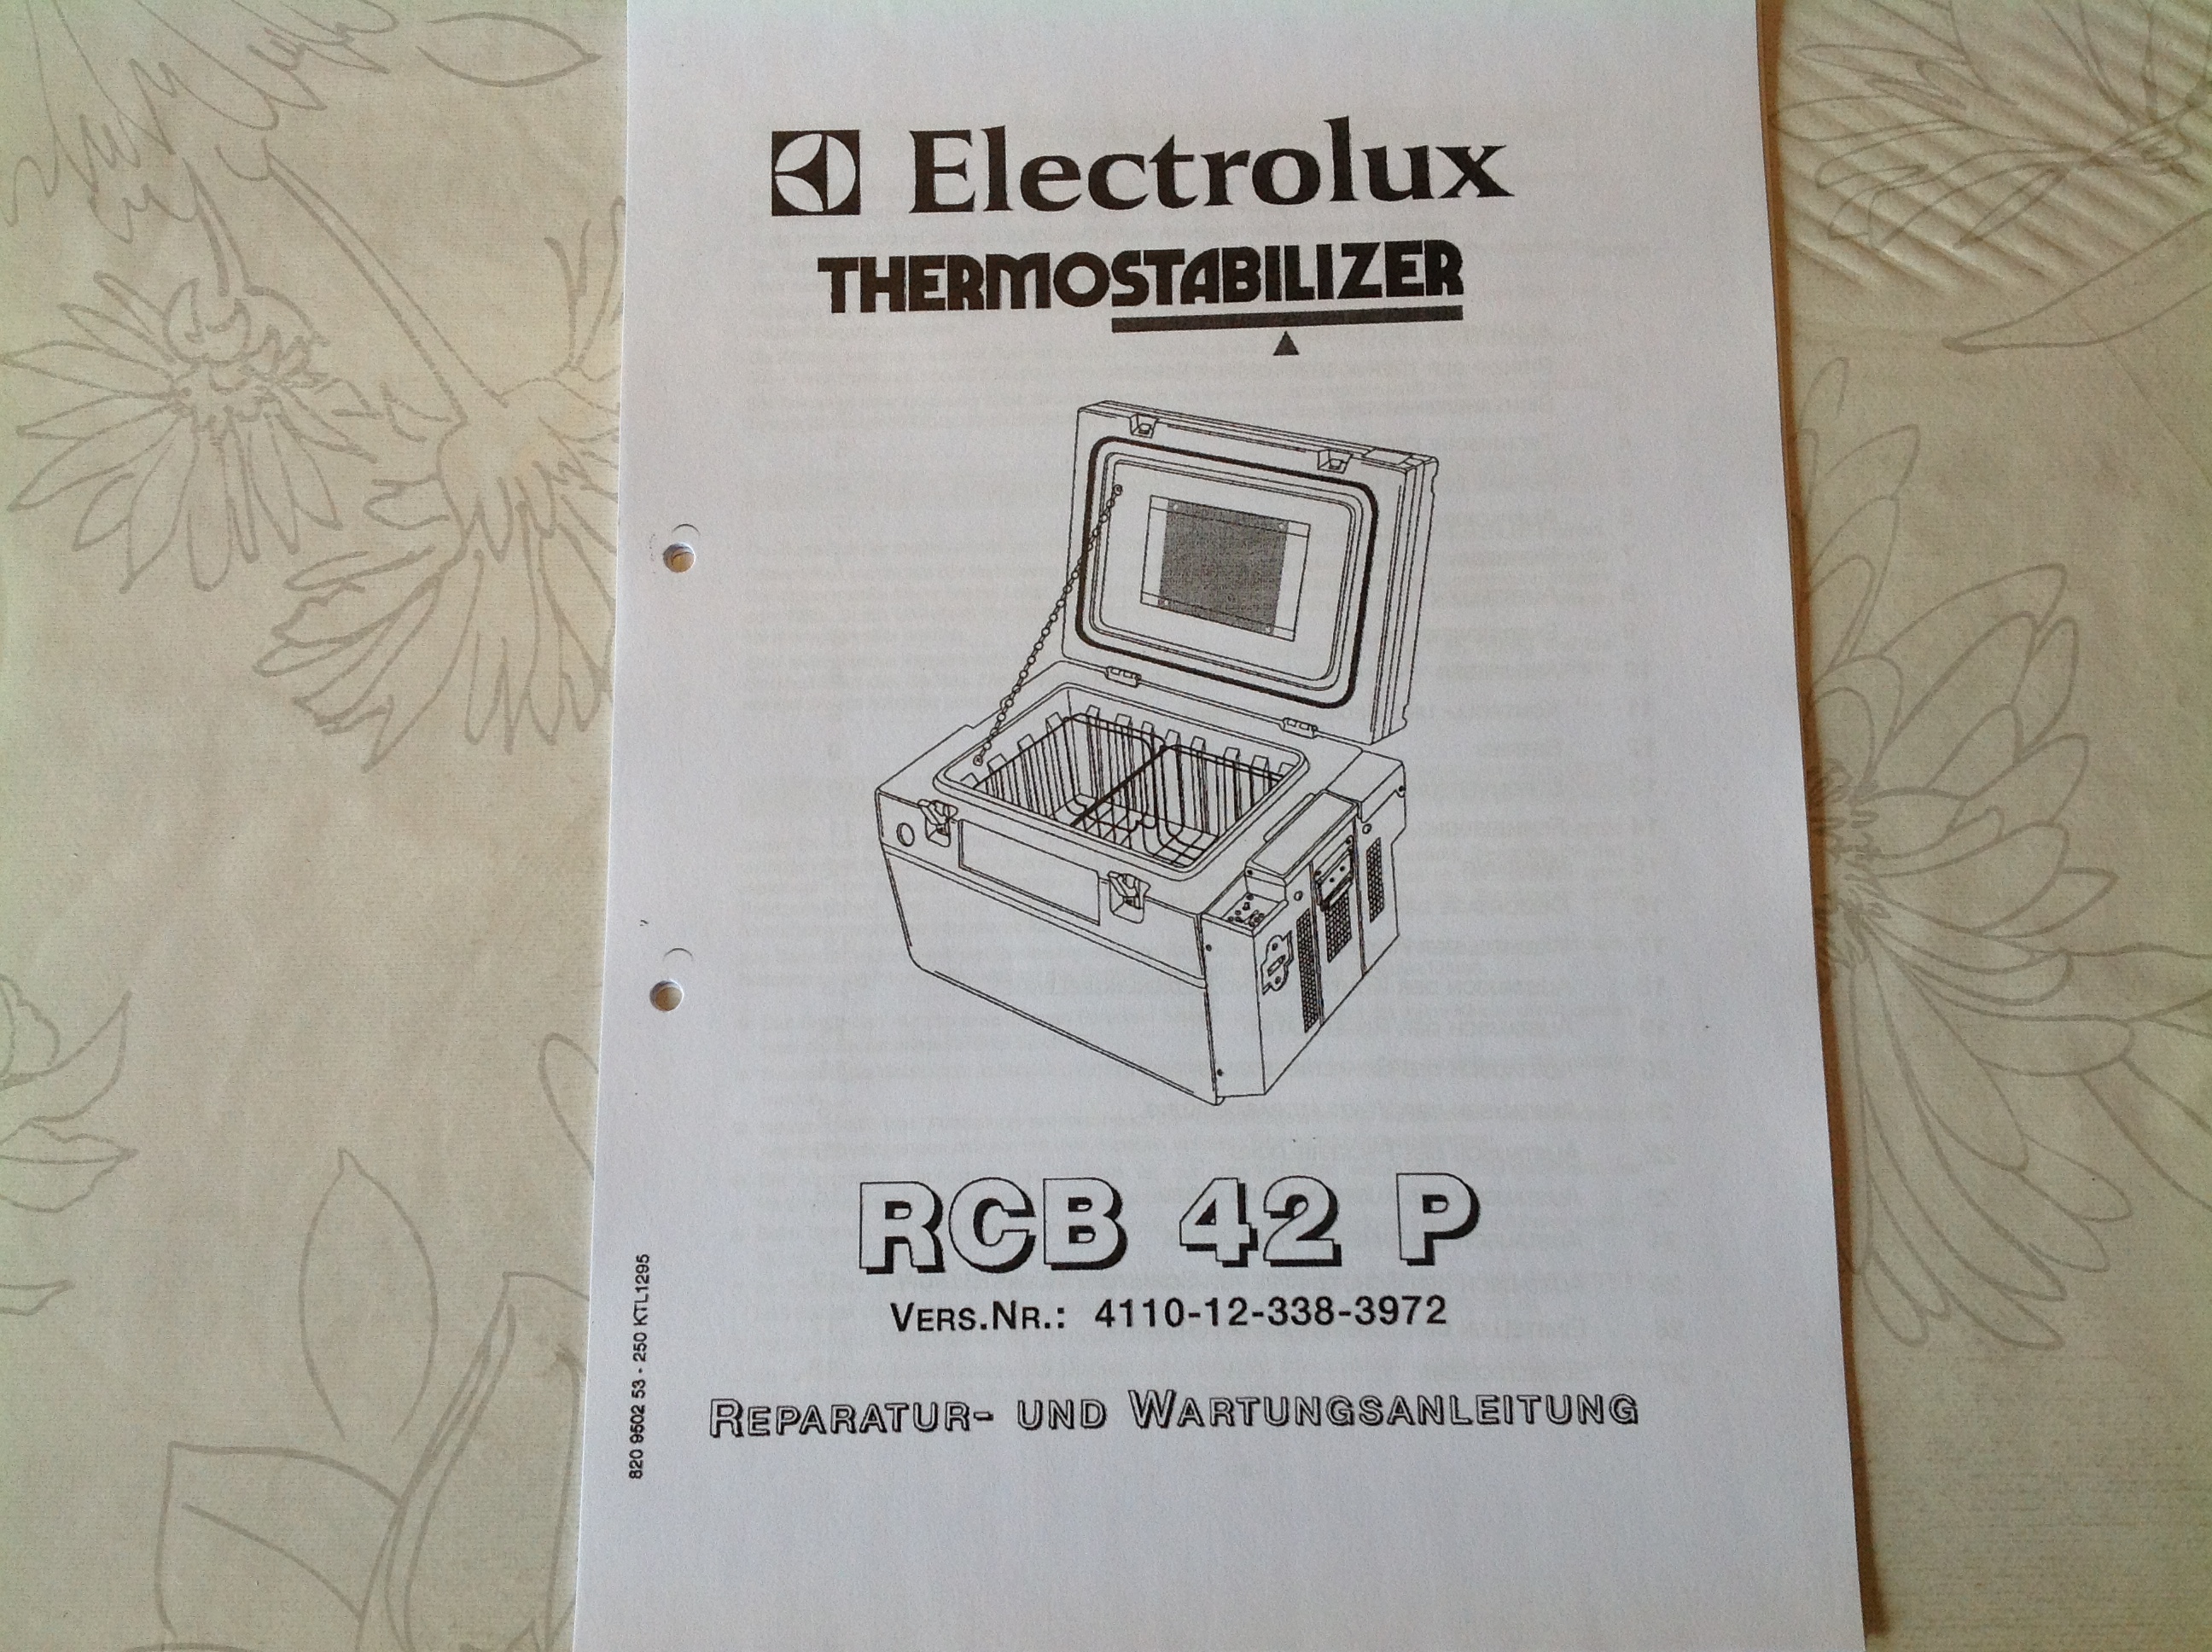 Electrolux Thermo Stabilizer RCB 42 P